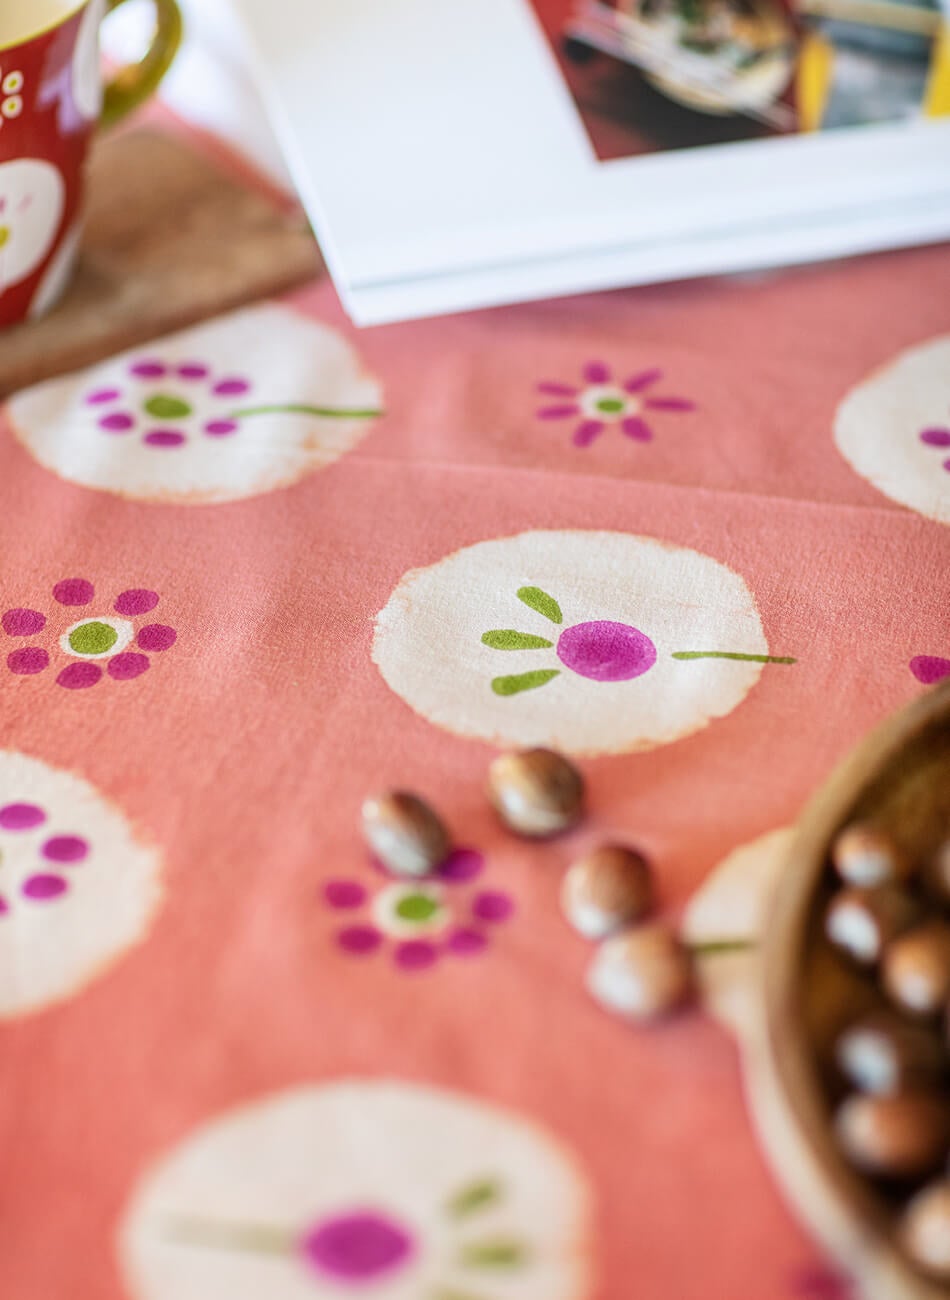 Tablecloth ”Indra” in organic cotton